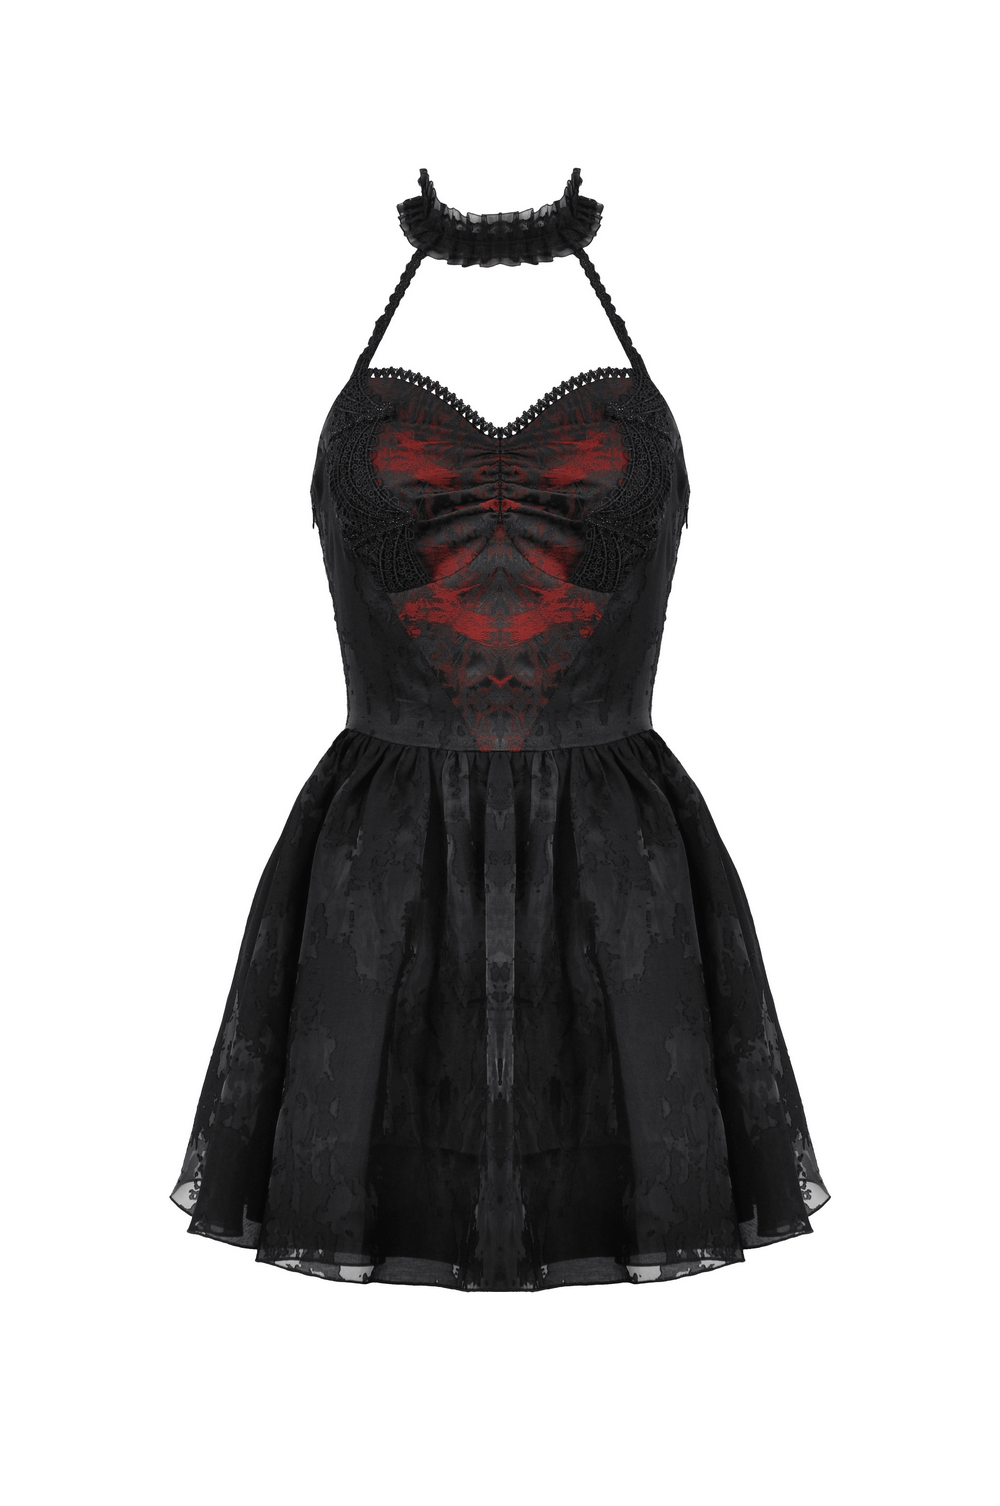 Gothic Black Halter Dress with Lace and Ruffle Details